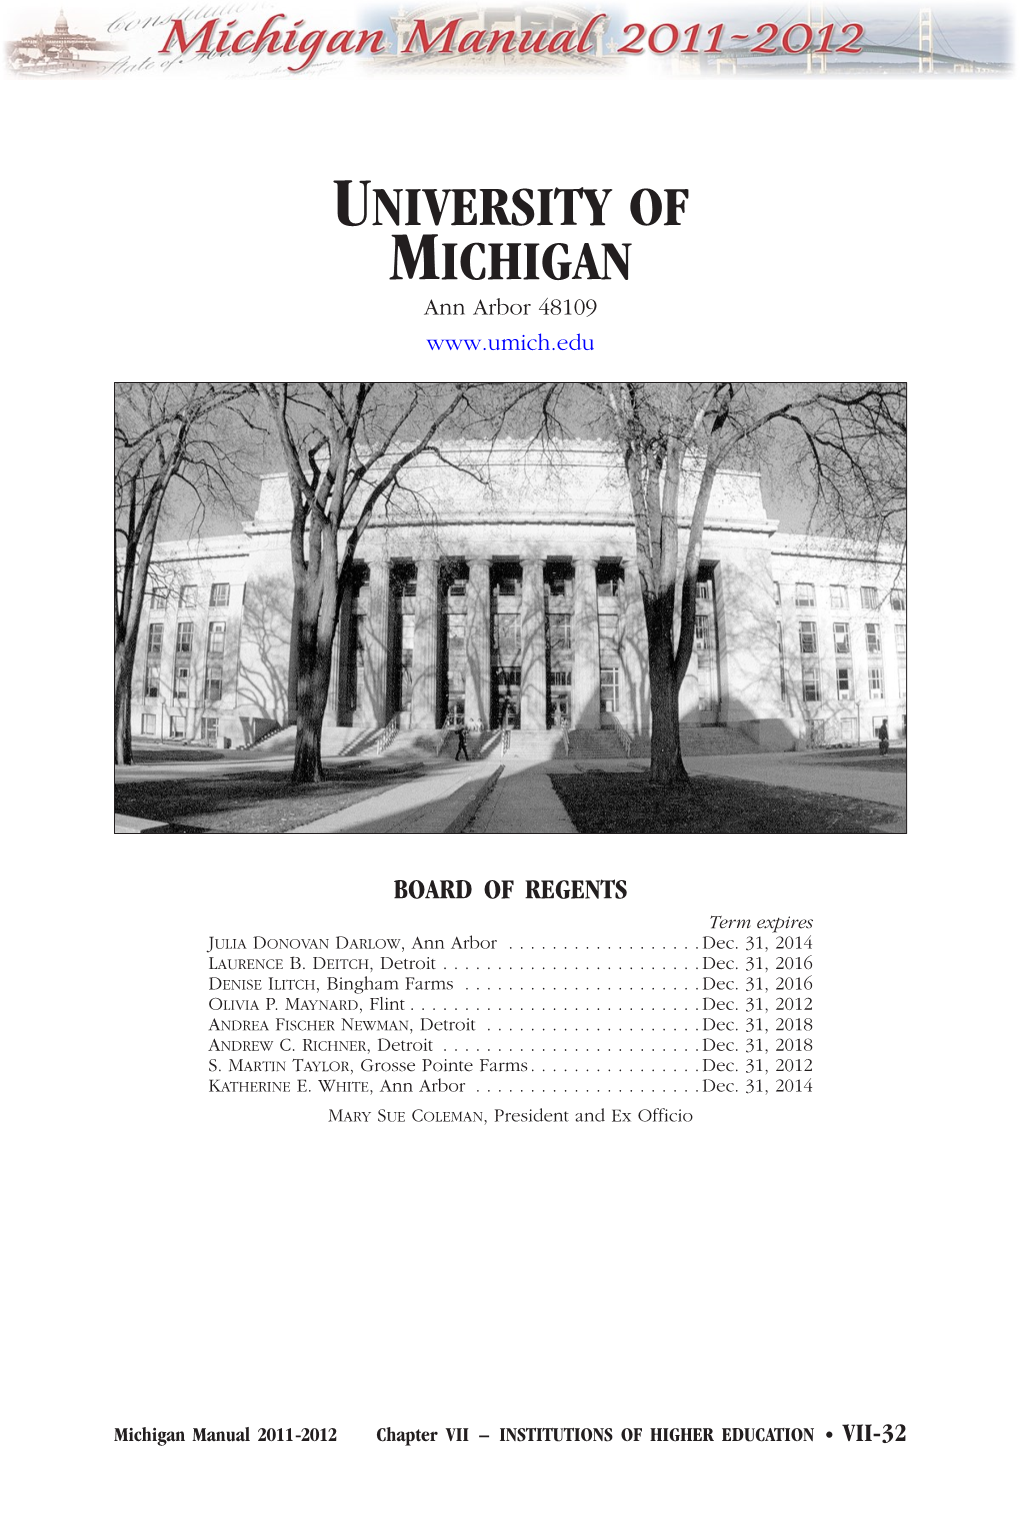 University of Michigan Section 5 of Article VIII of the Constitution of 1963 Provides for the Regents of the University of Michigan